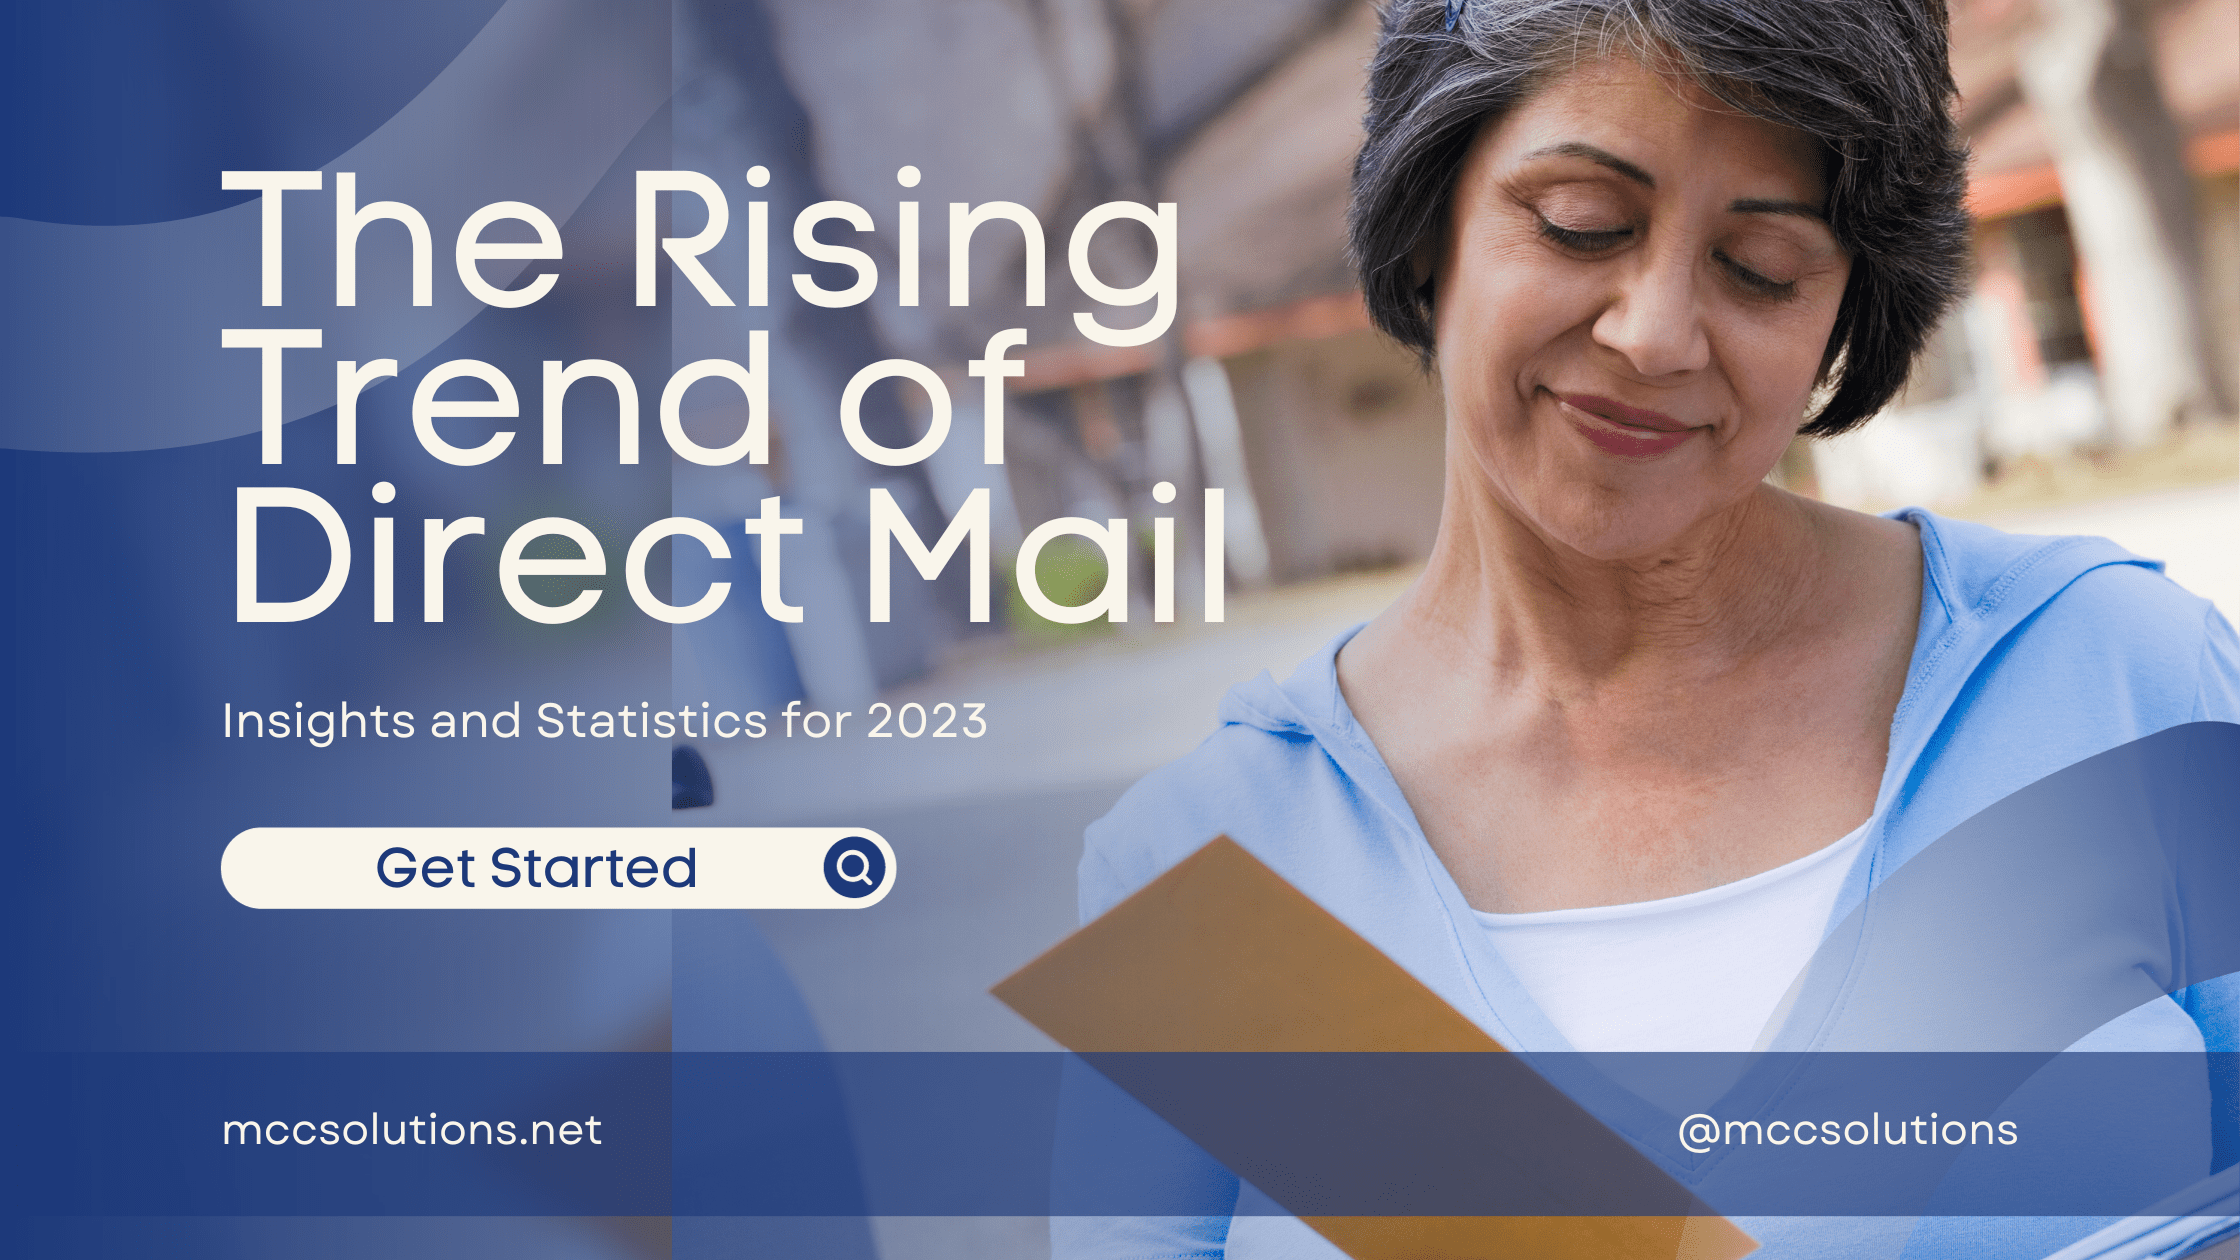 The Rising Trend of Direct Mail: Insights and Statistics for 2023